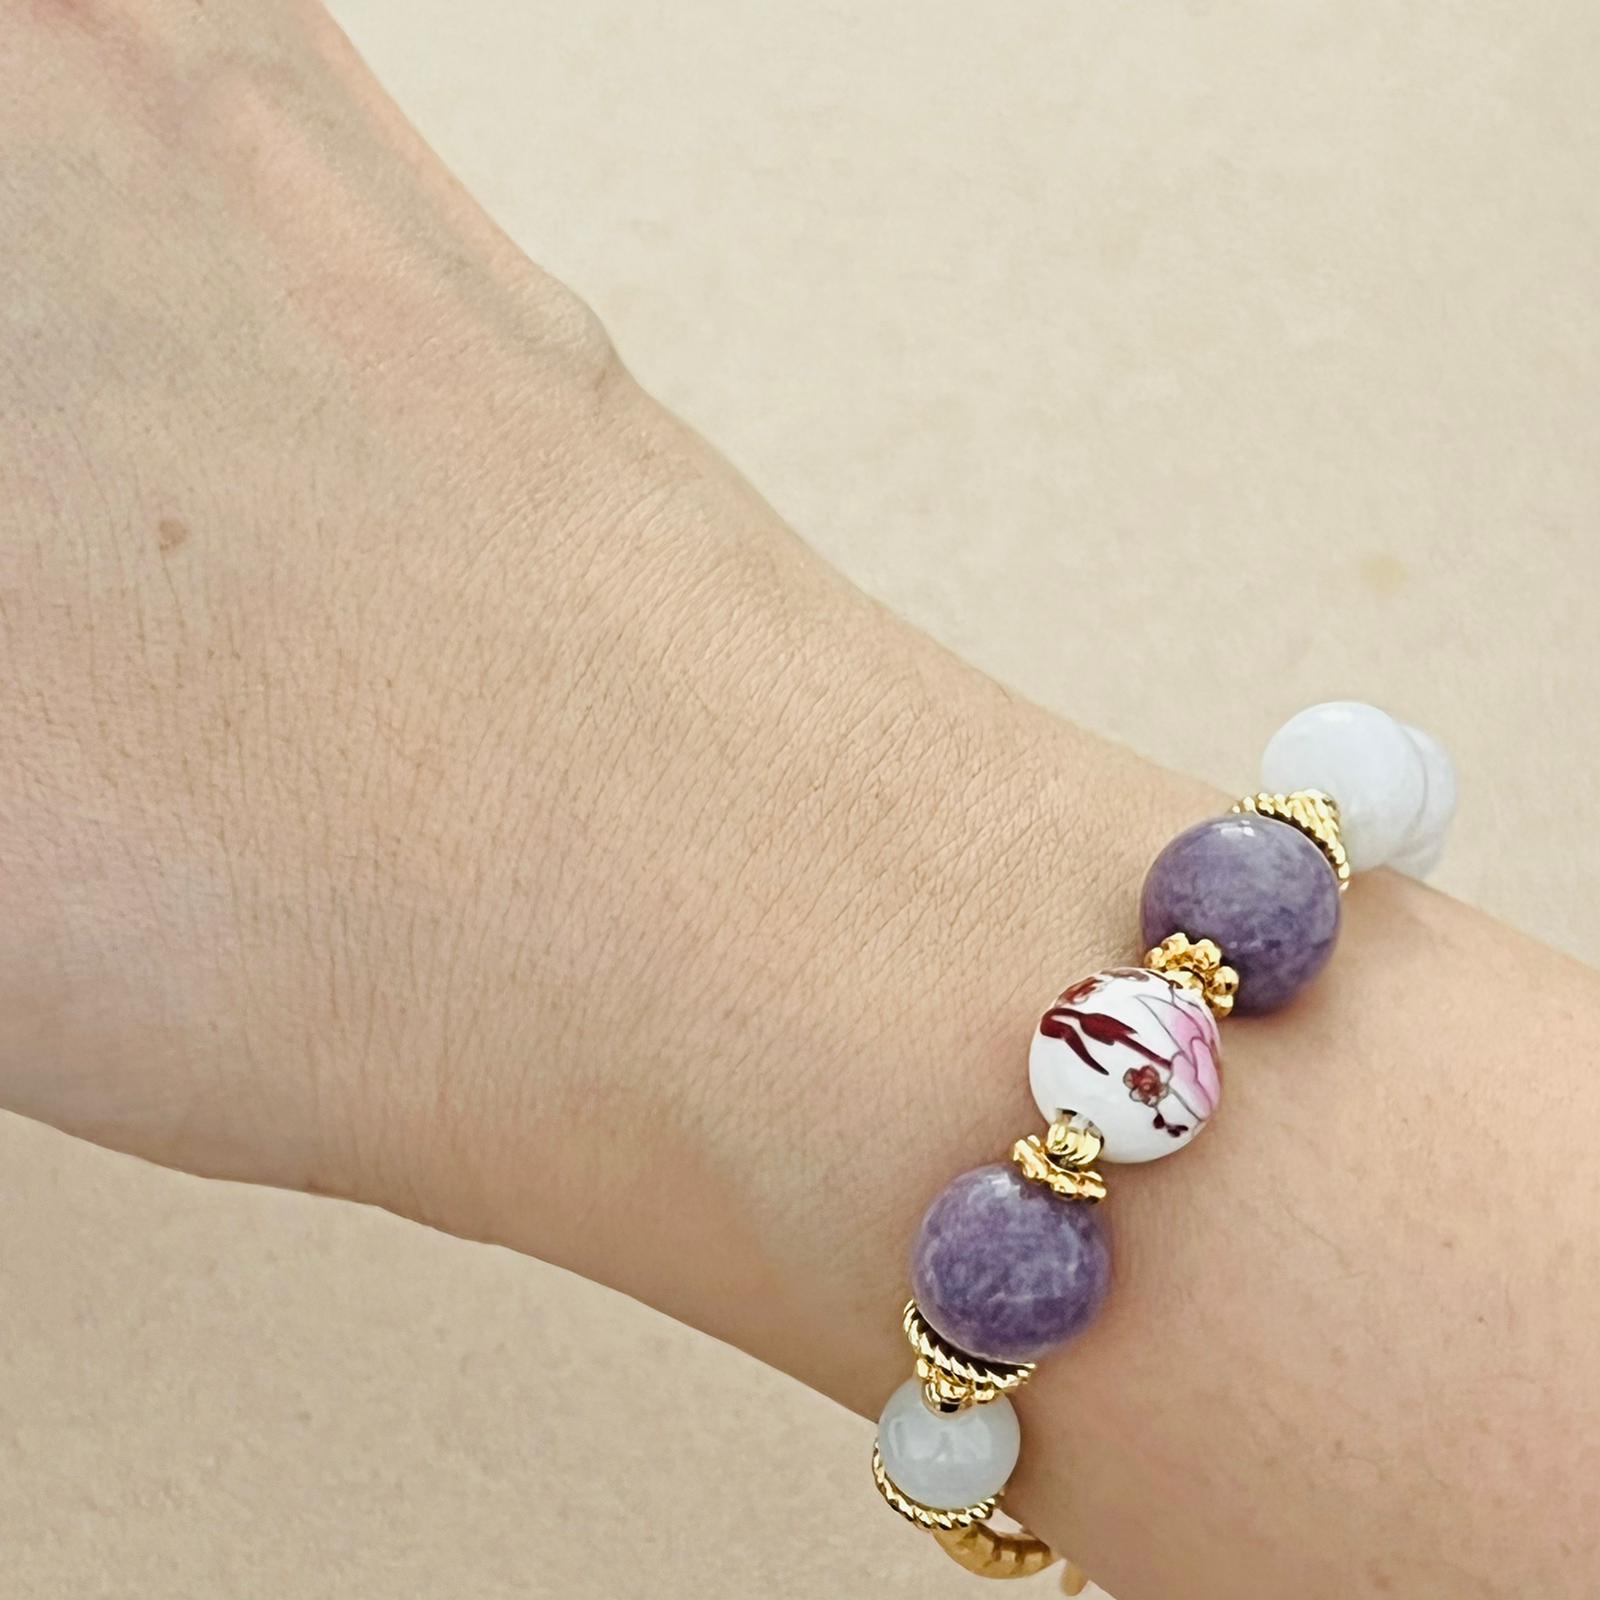 Shop Lepidolite & Learn The Lepidolite Meaning